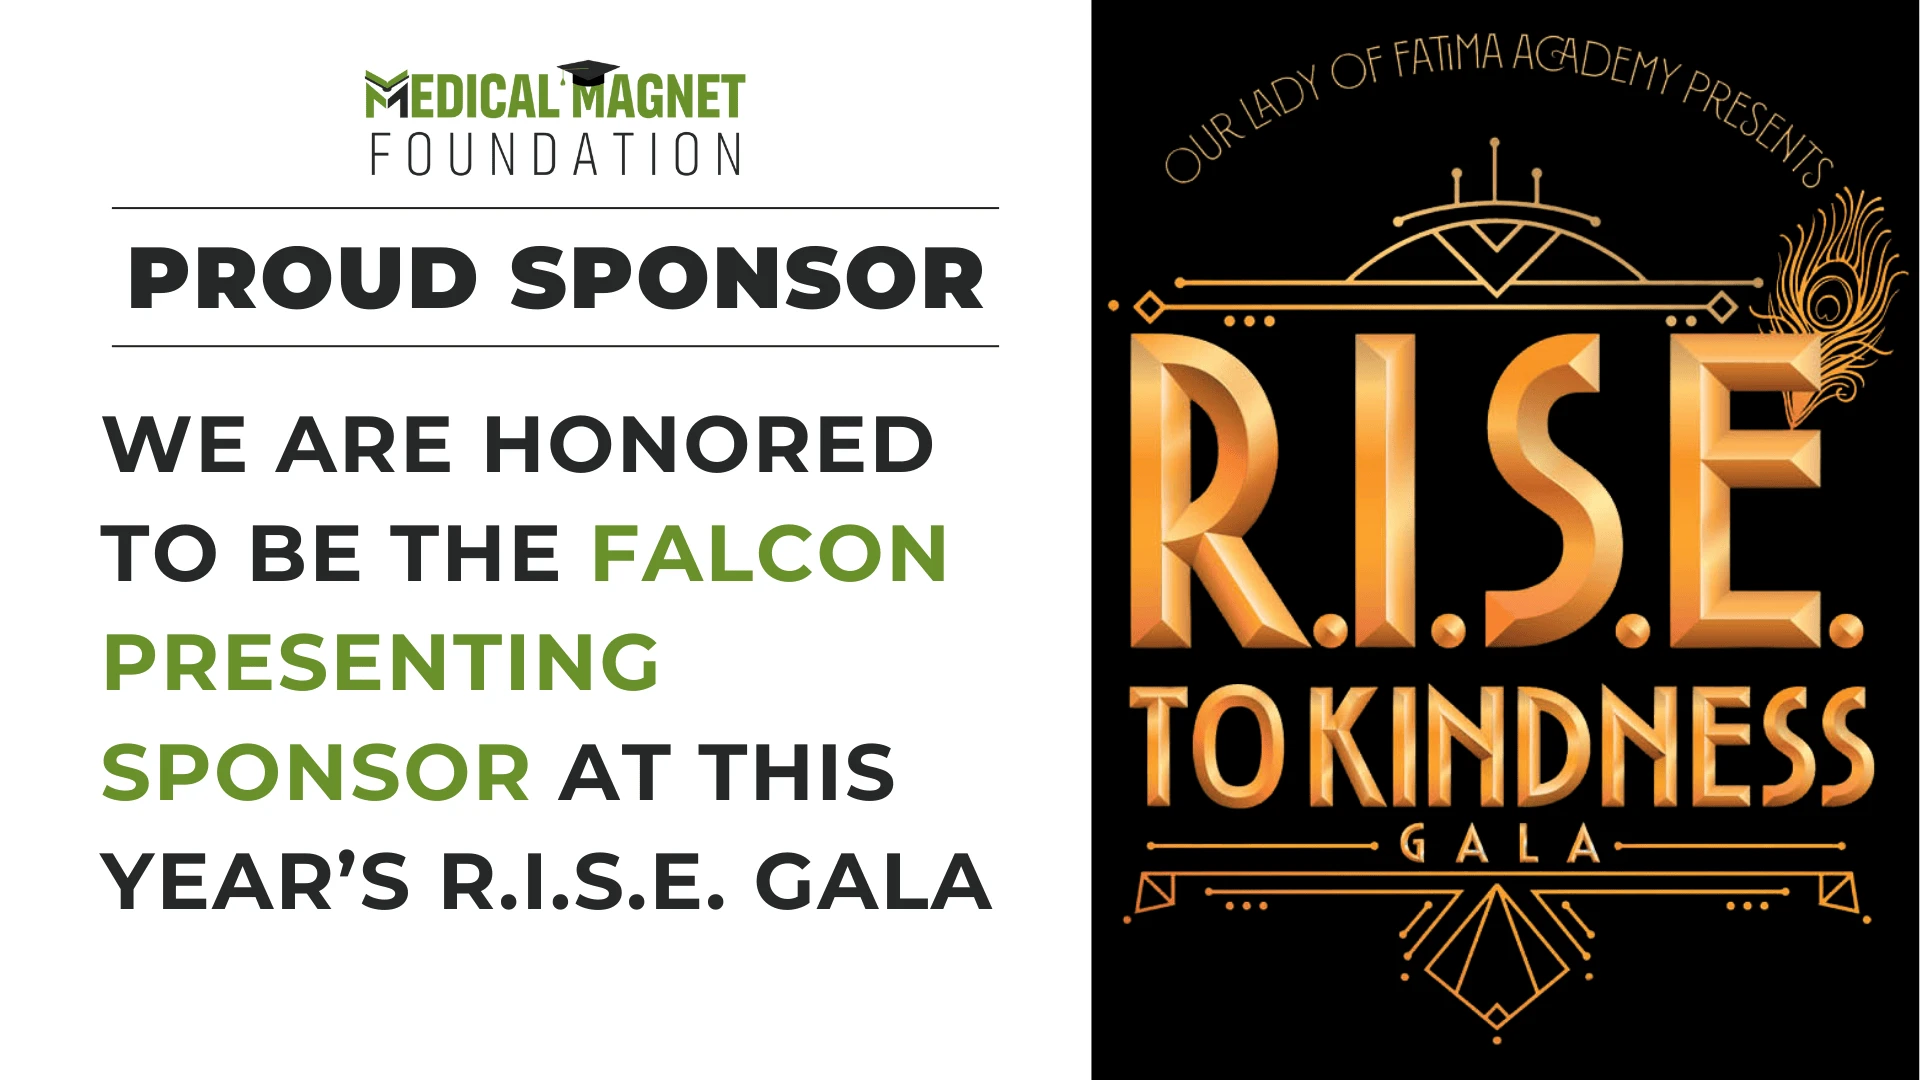 Medical Magnet Foundation Attends Gala As The Falcon Presenting Sponsor